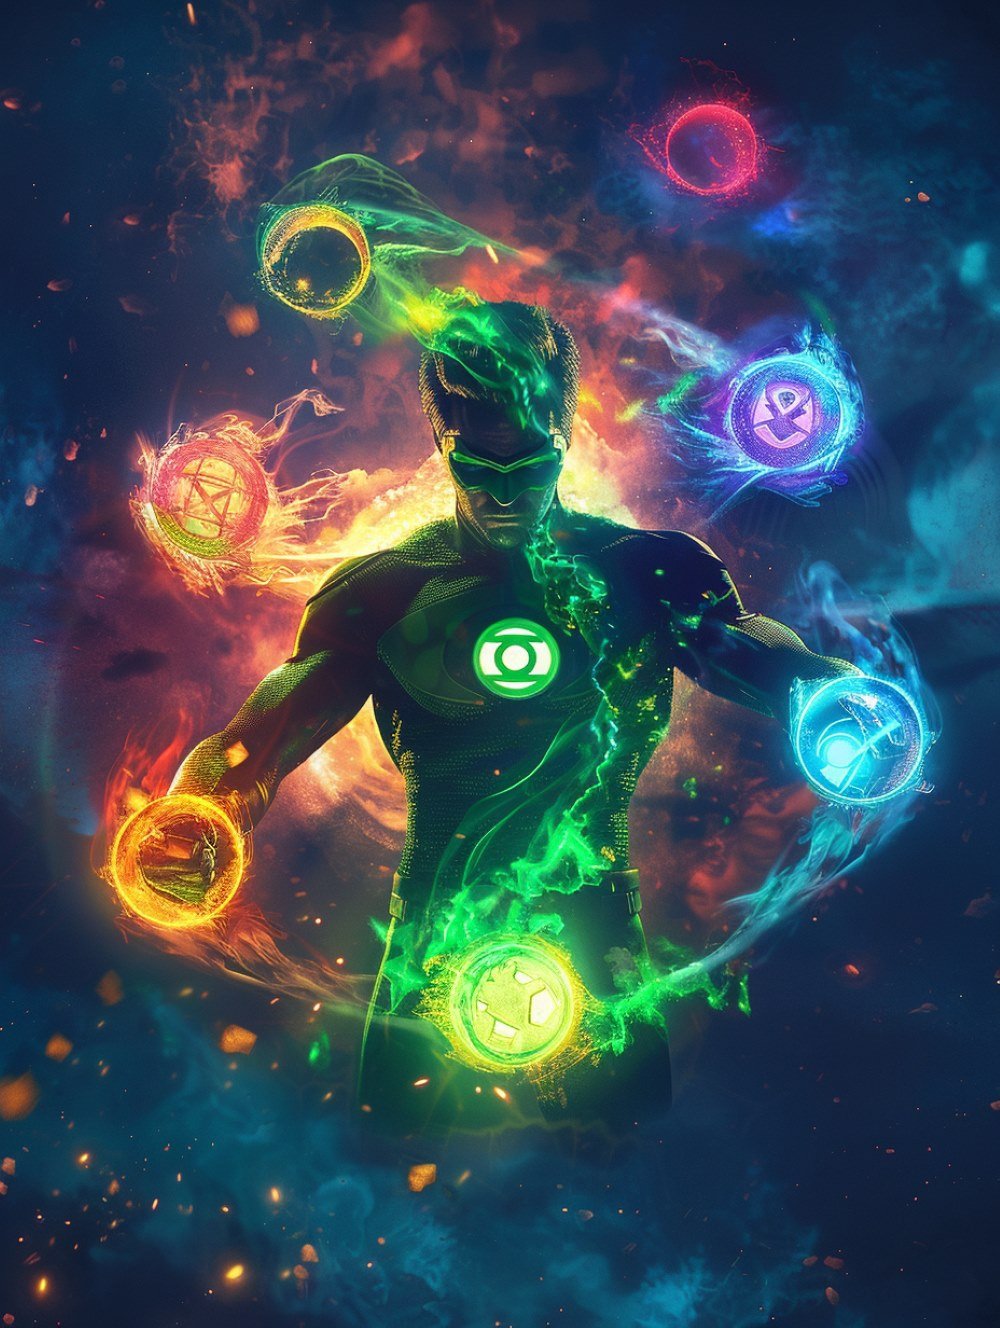 Kyle Rayer and 7 lantern rings